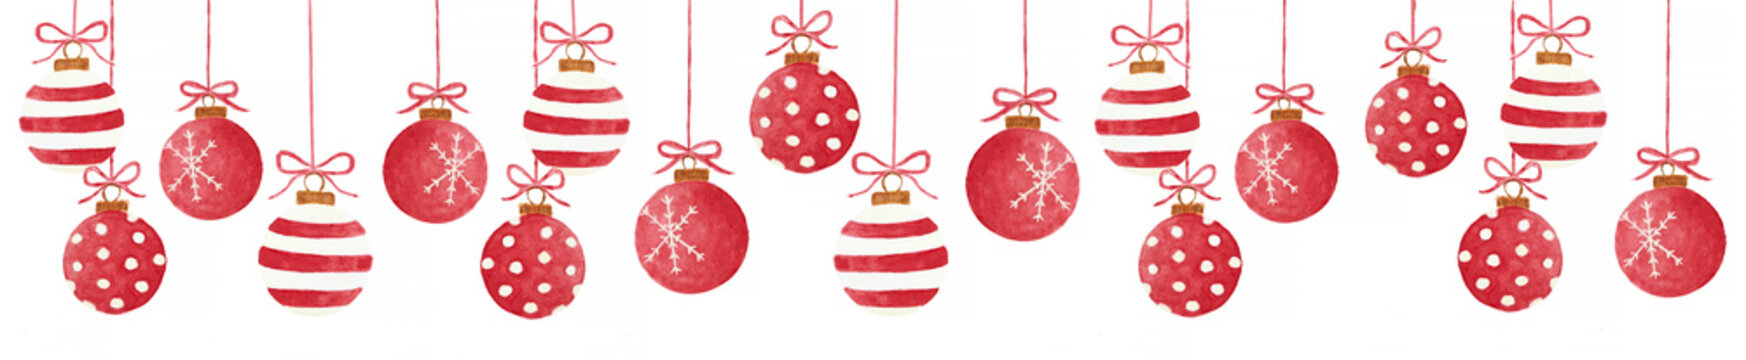 Collage of red Christmas hanging baubles on white, watercolor